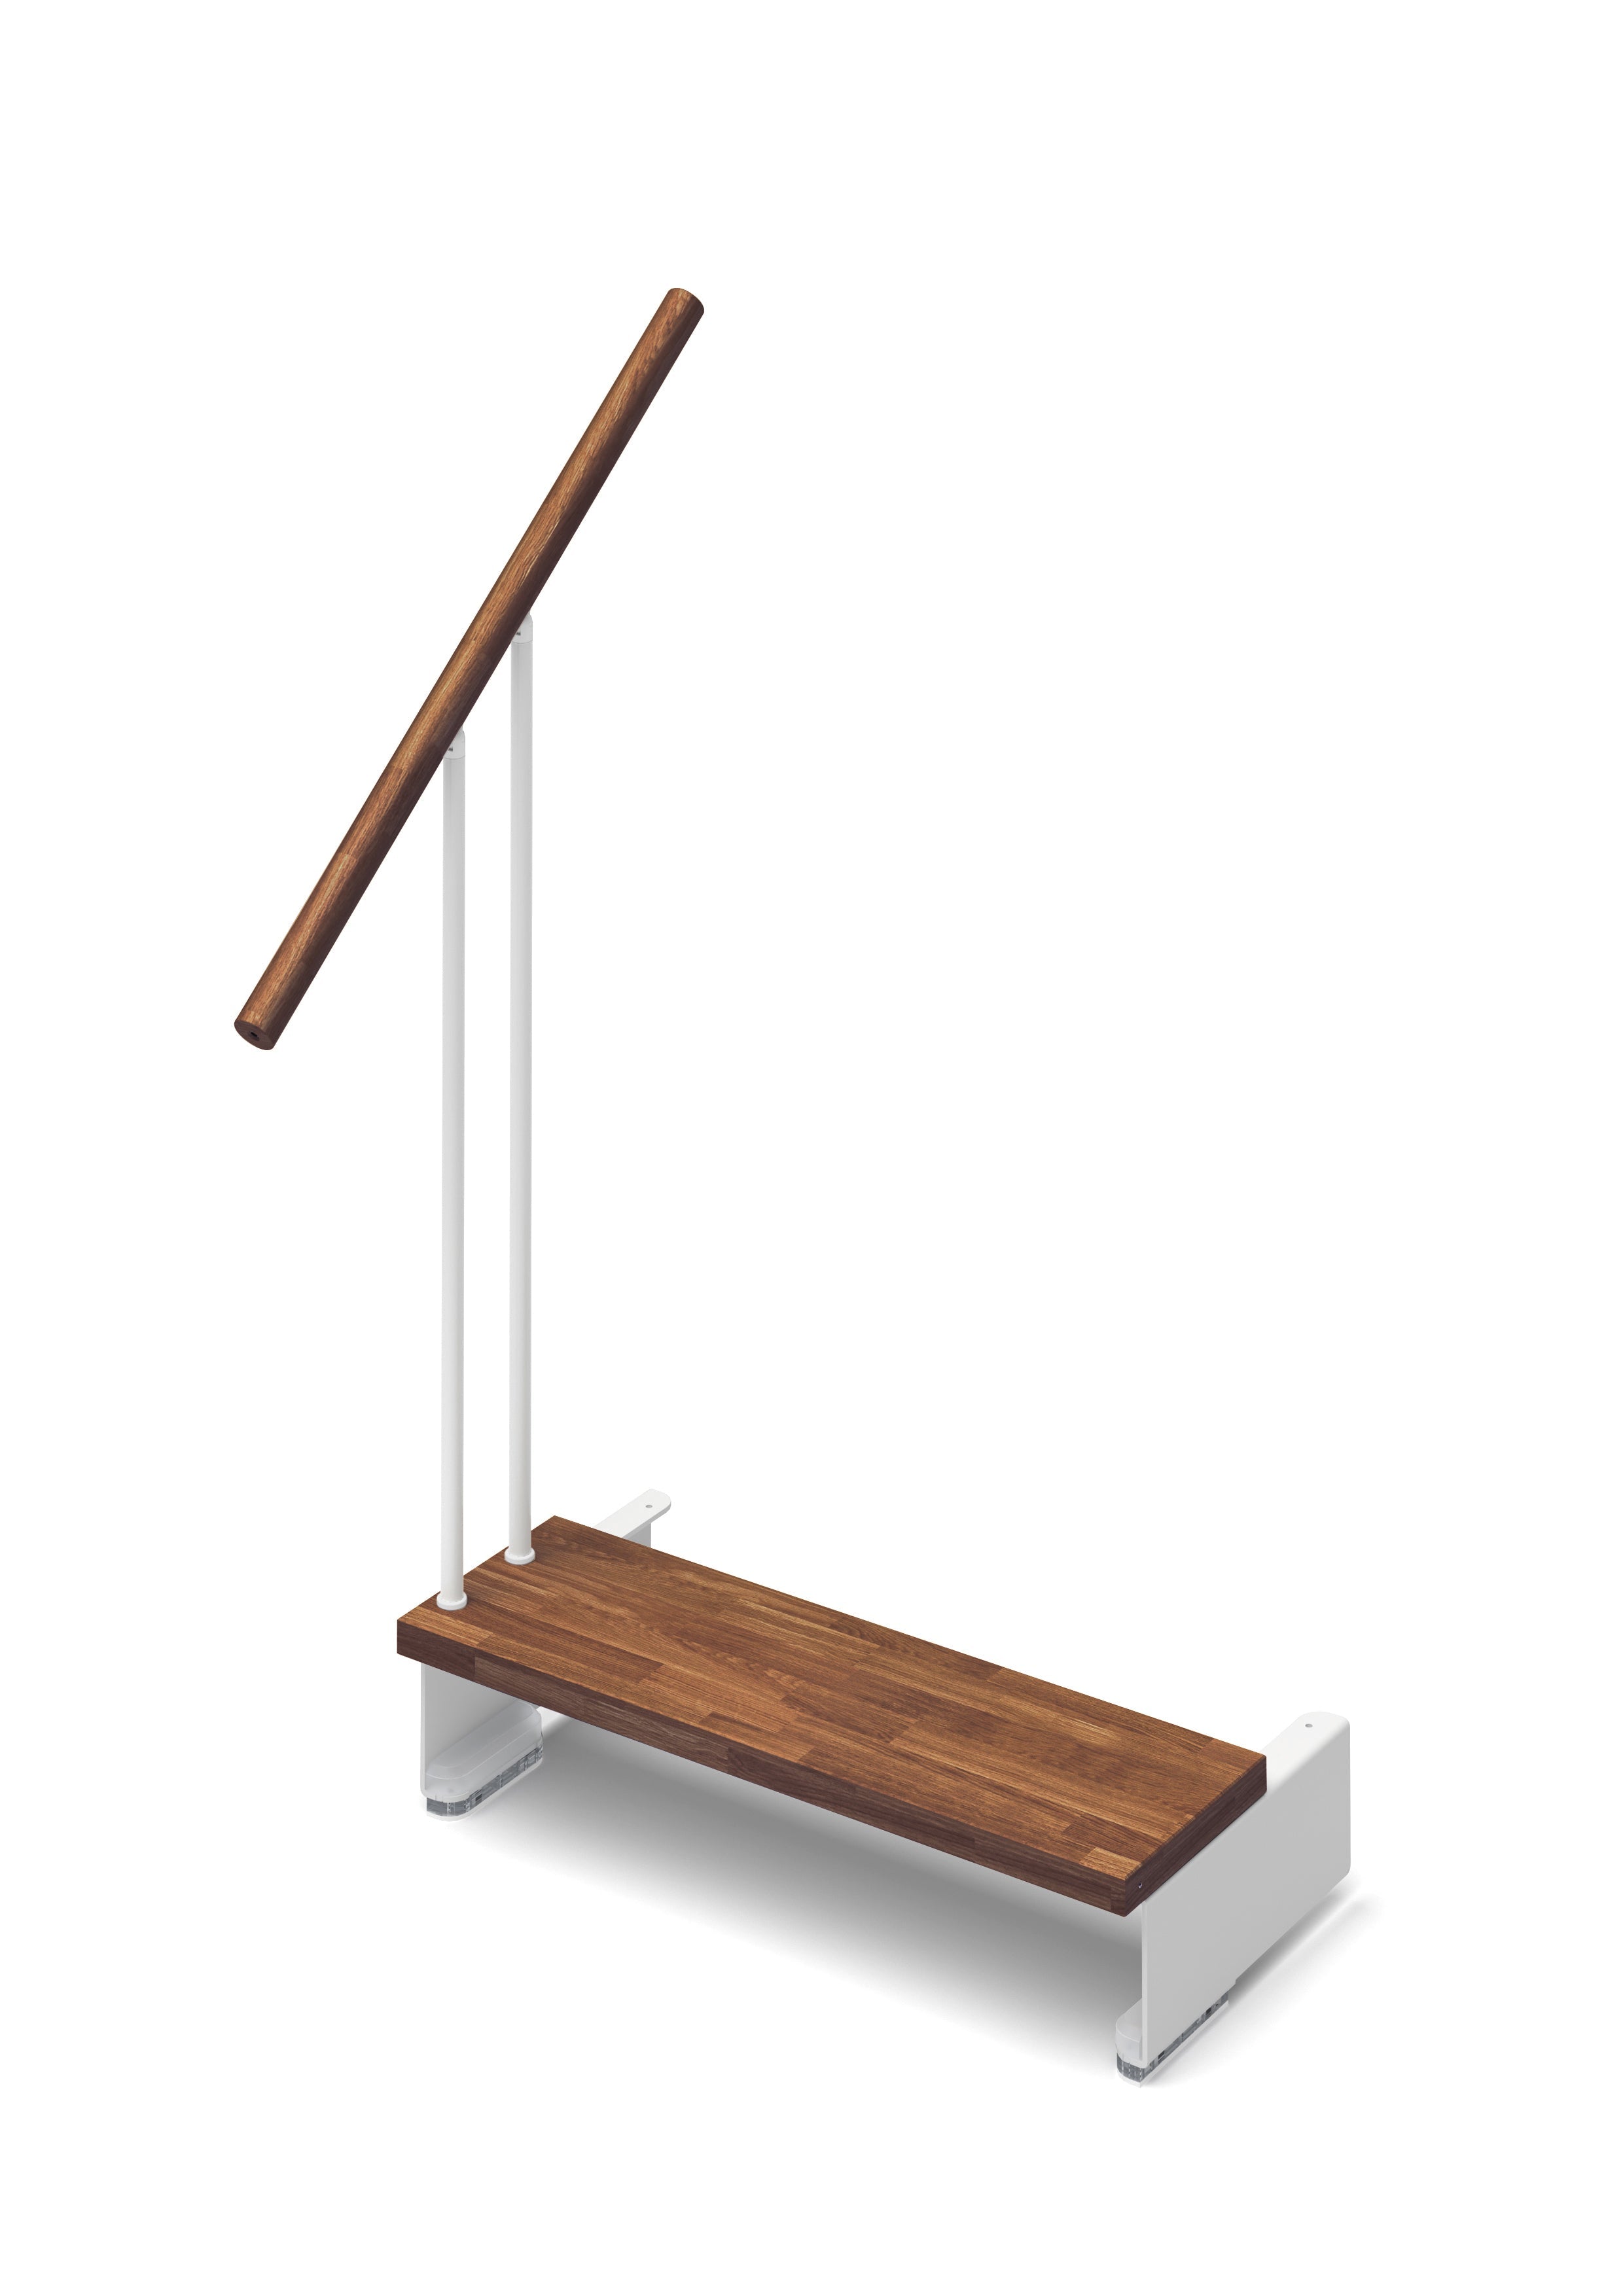 Additional step Adapta 74cm (with structure and railing) - Walnut 25